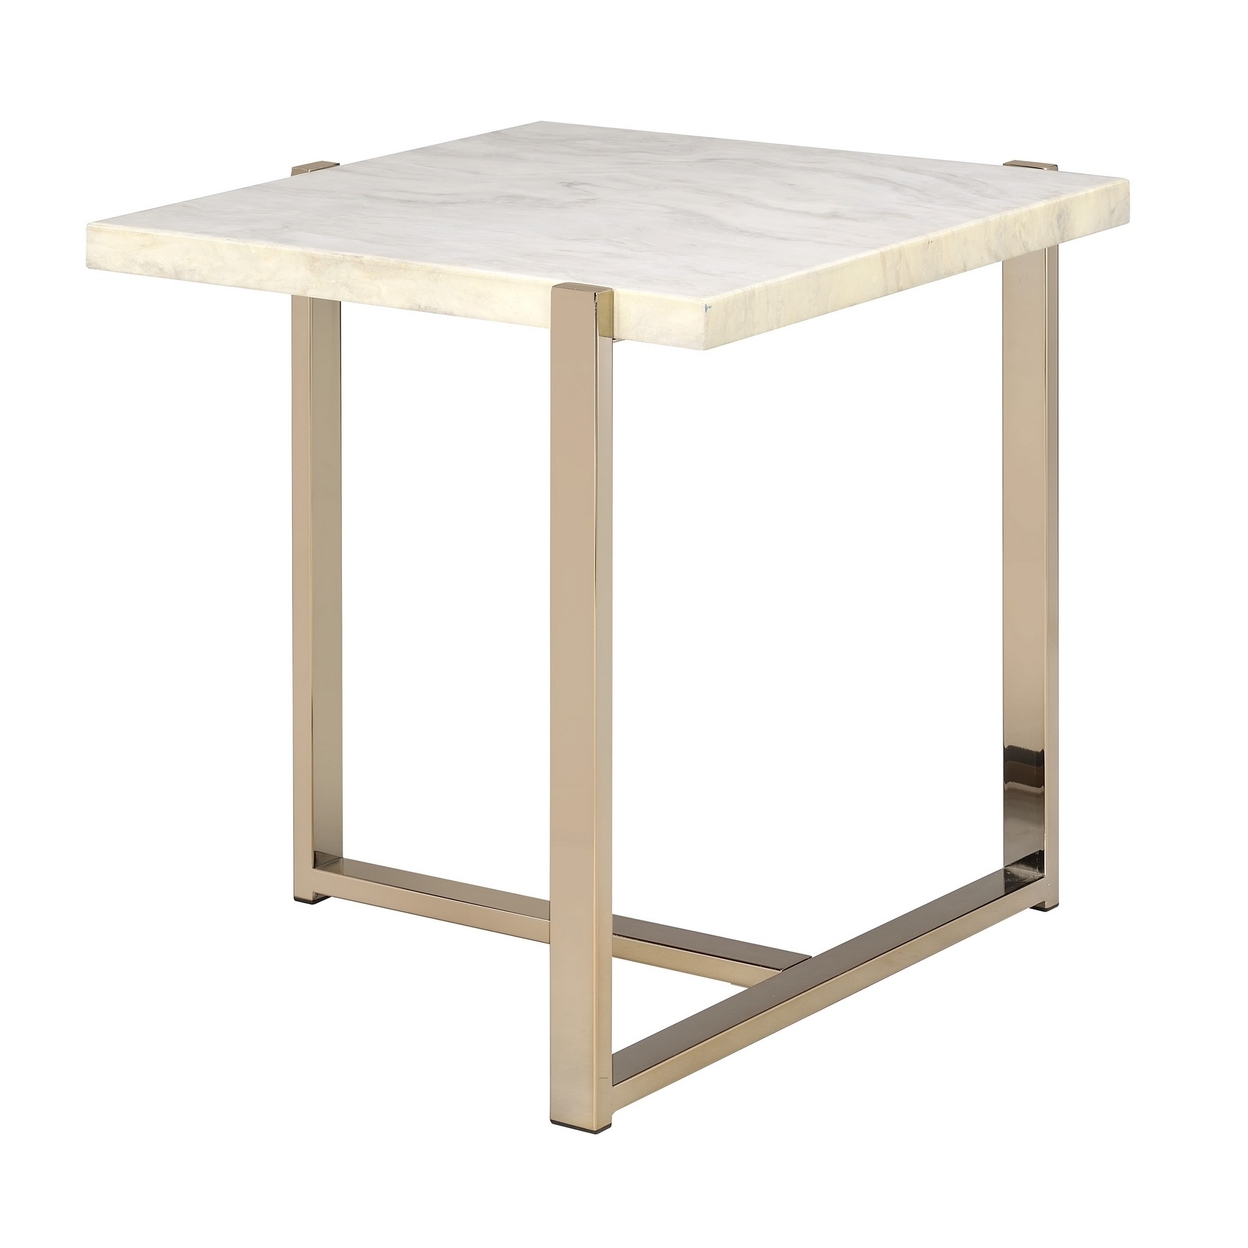 Modern Style Marbleized Wooden End Table With Tubular Metal Frame, Gold And White- Saltoro Sherpi